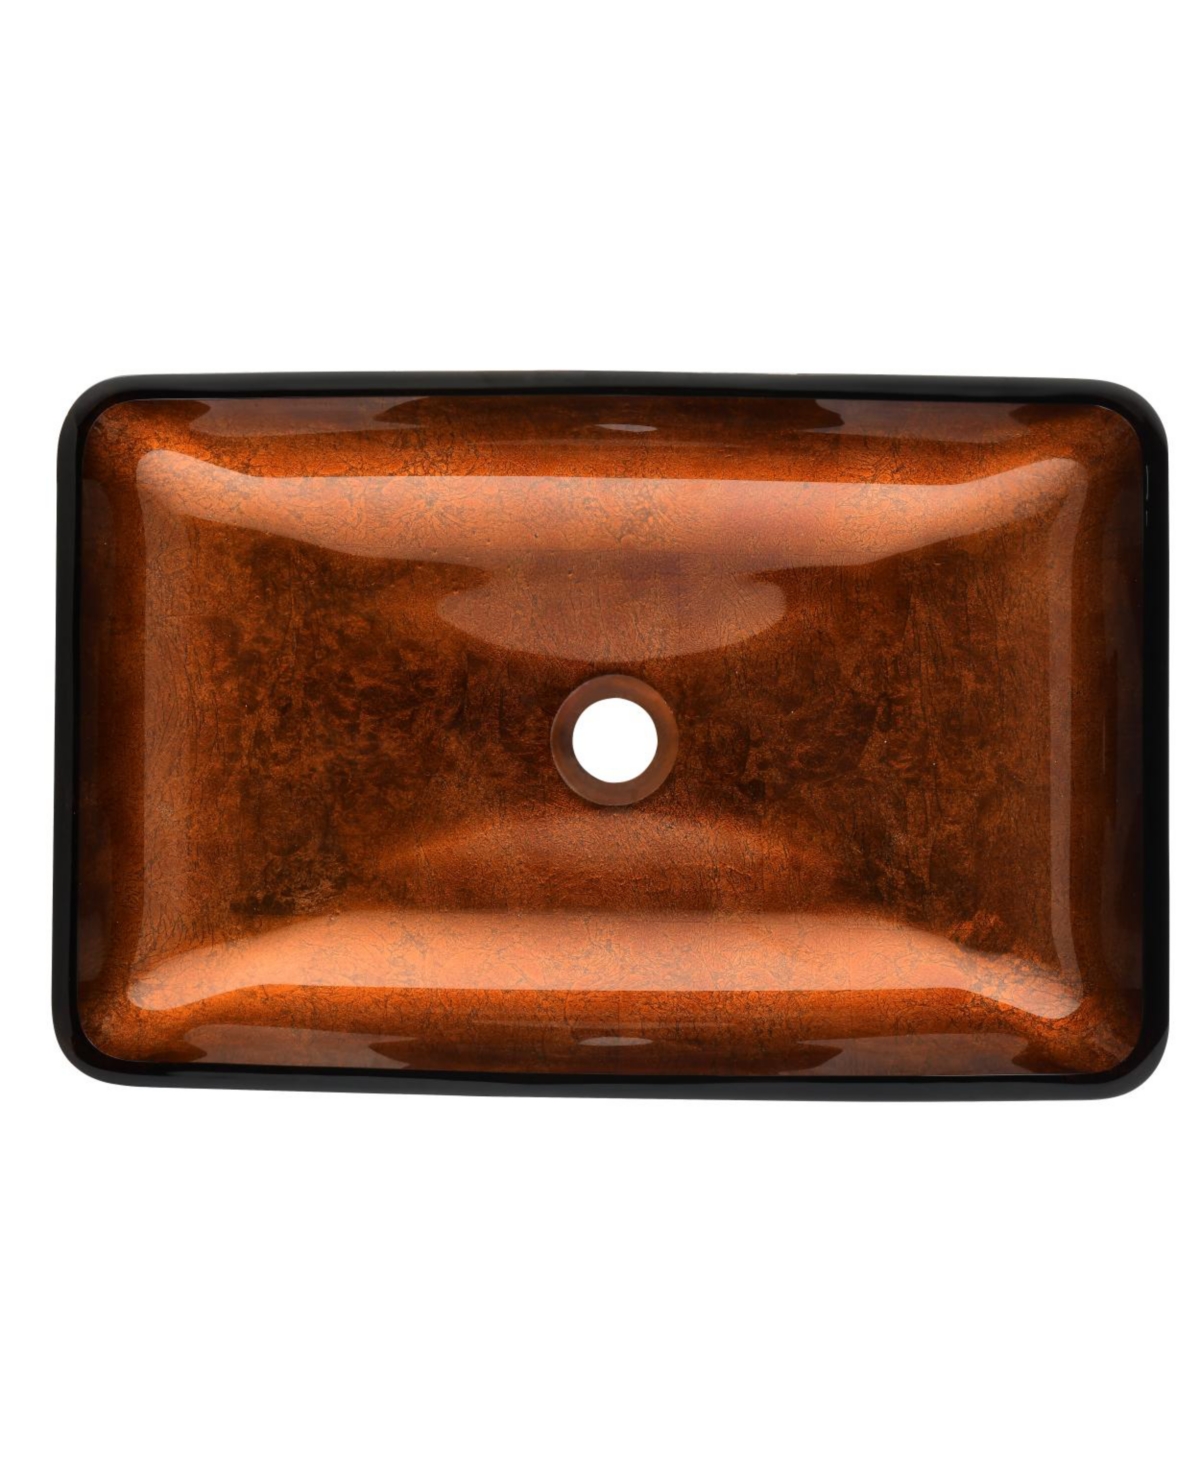 Handmade Glass Rectangle Bathroom Sink Set, Chocolate Brown Finish with Gold Faucet - Brown